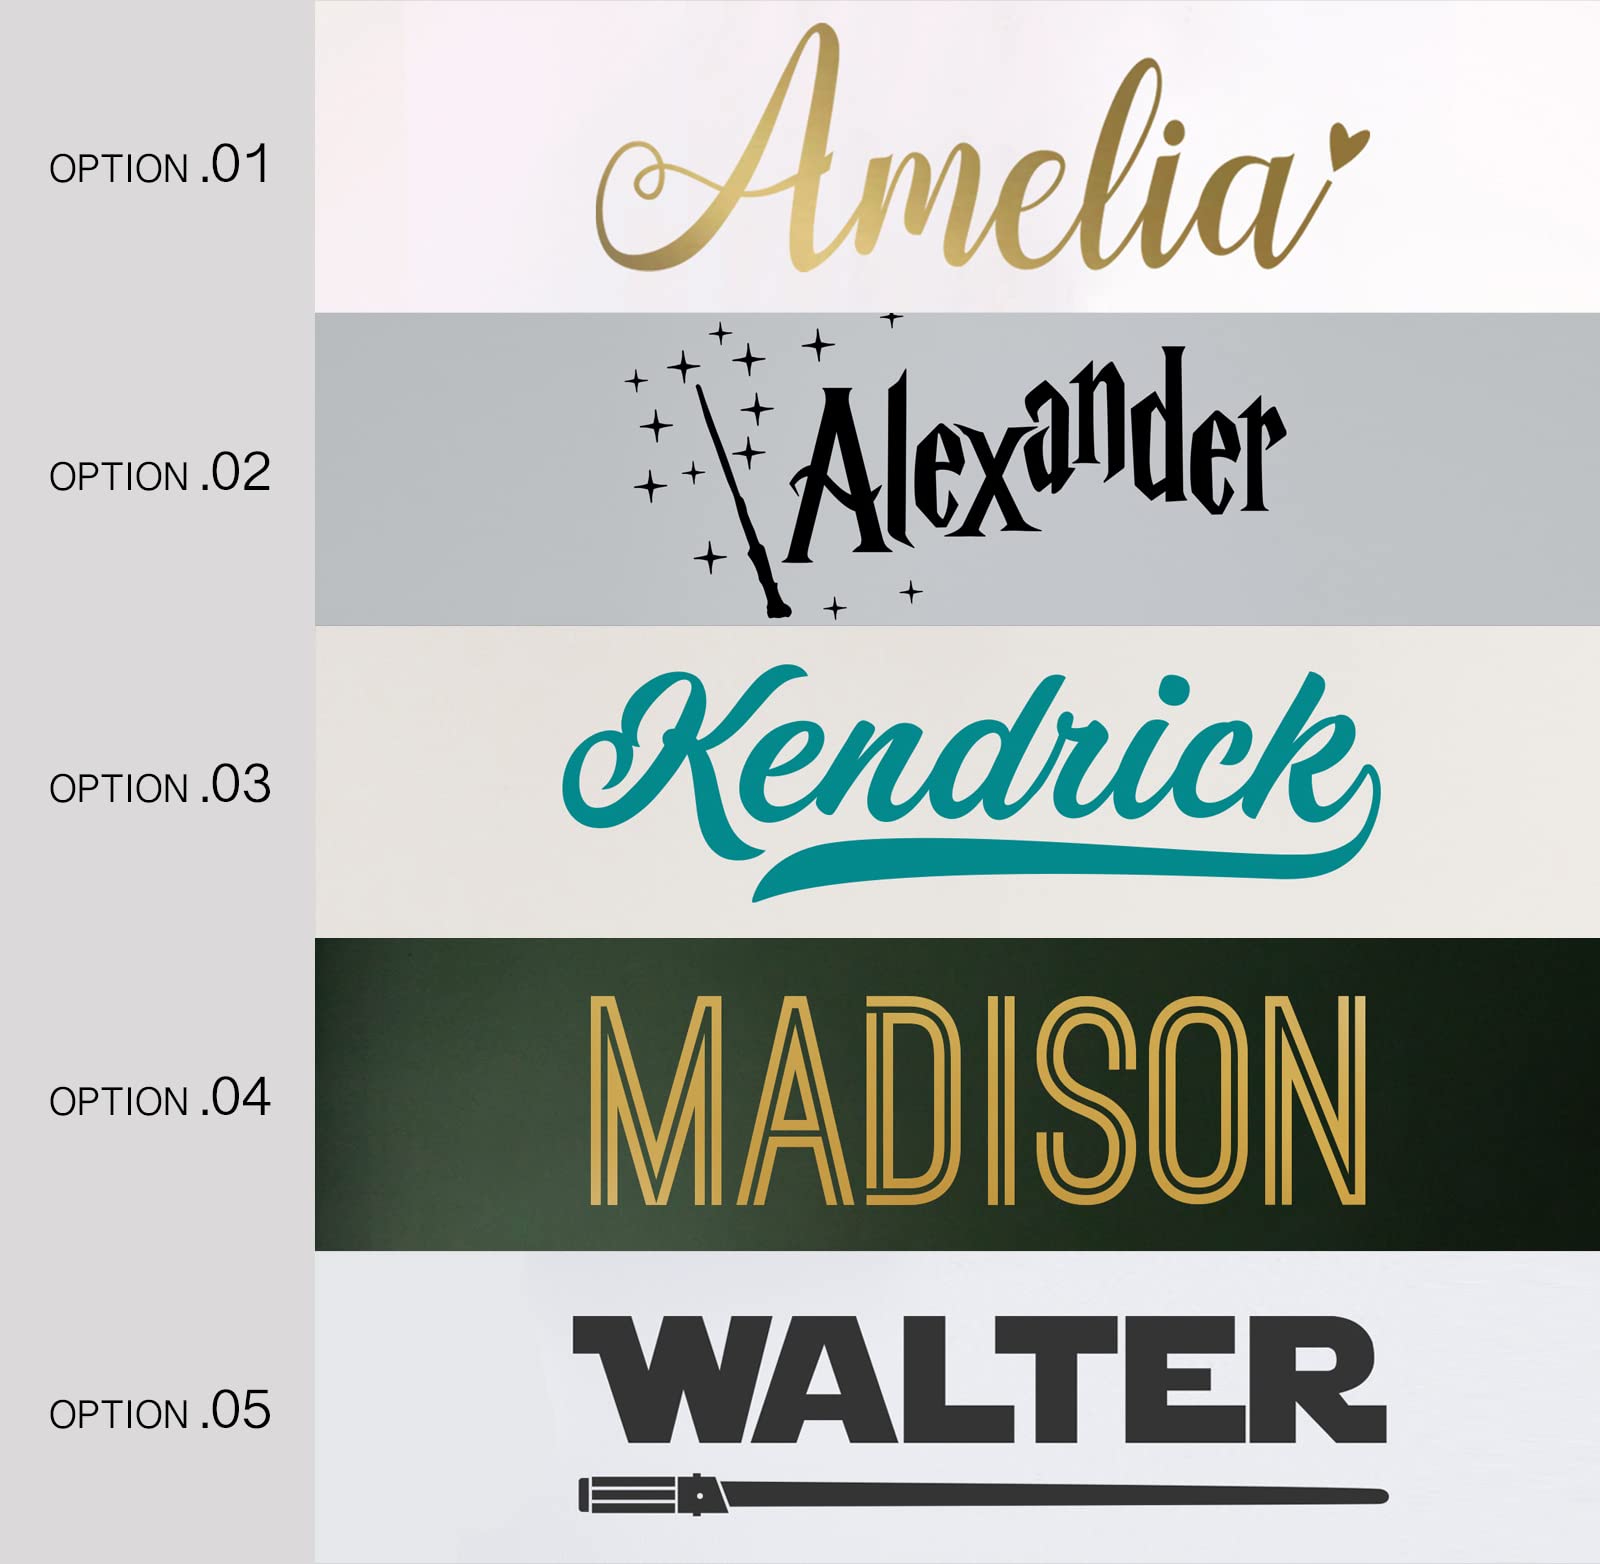 Custom Name wall Decal/Best selling items/Girls name sticker/Personalized Wall Decal/Nursery Baby Name Decal/kids name sticker/Gift/Made in USA